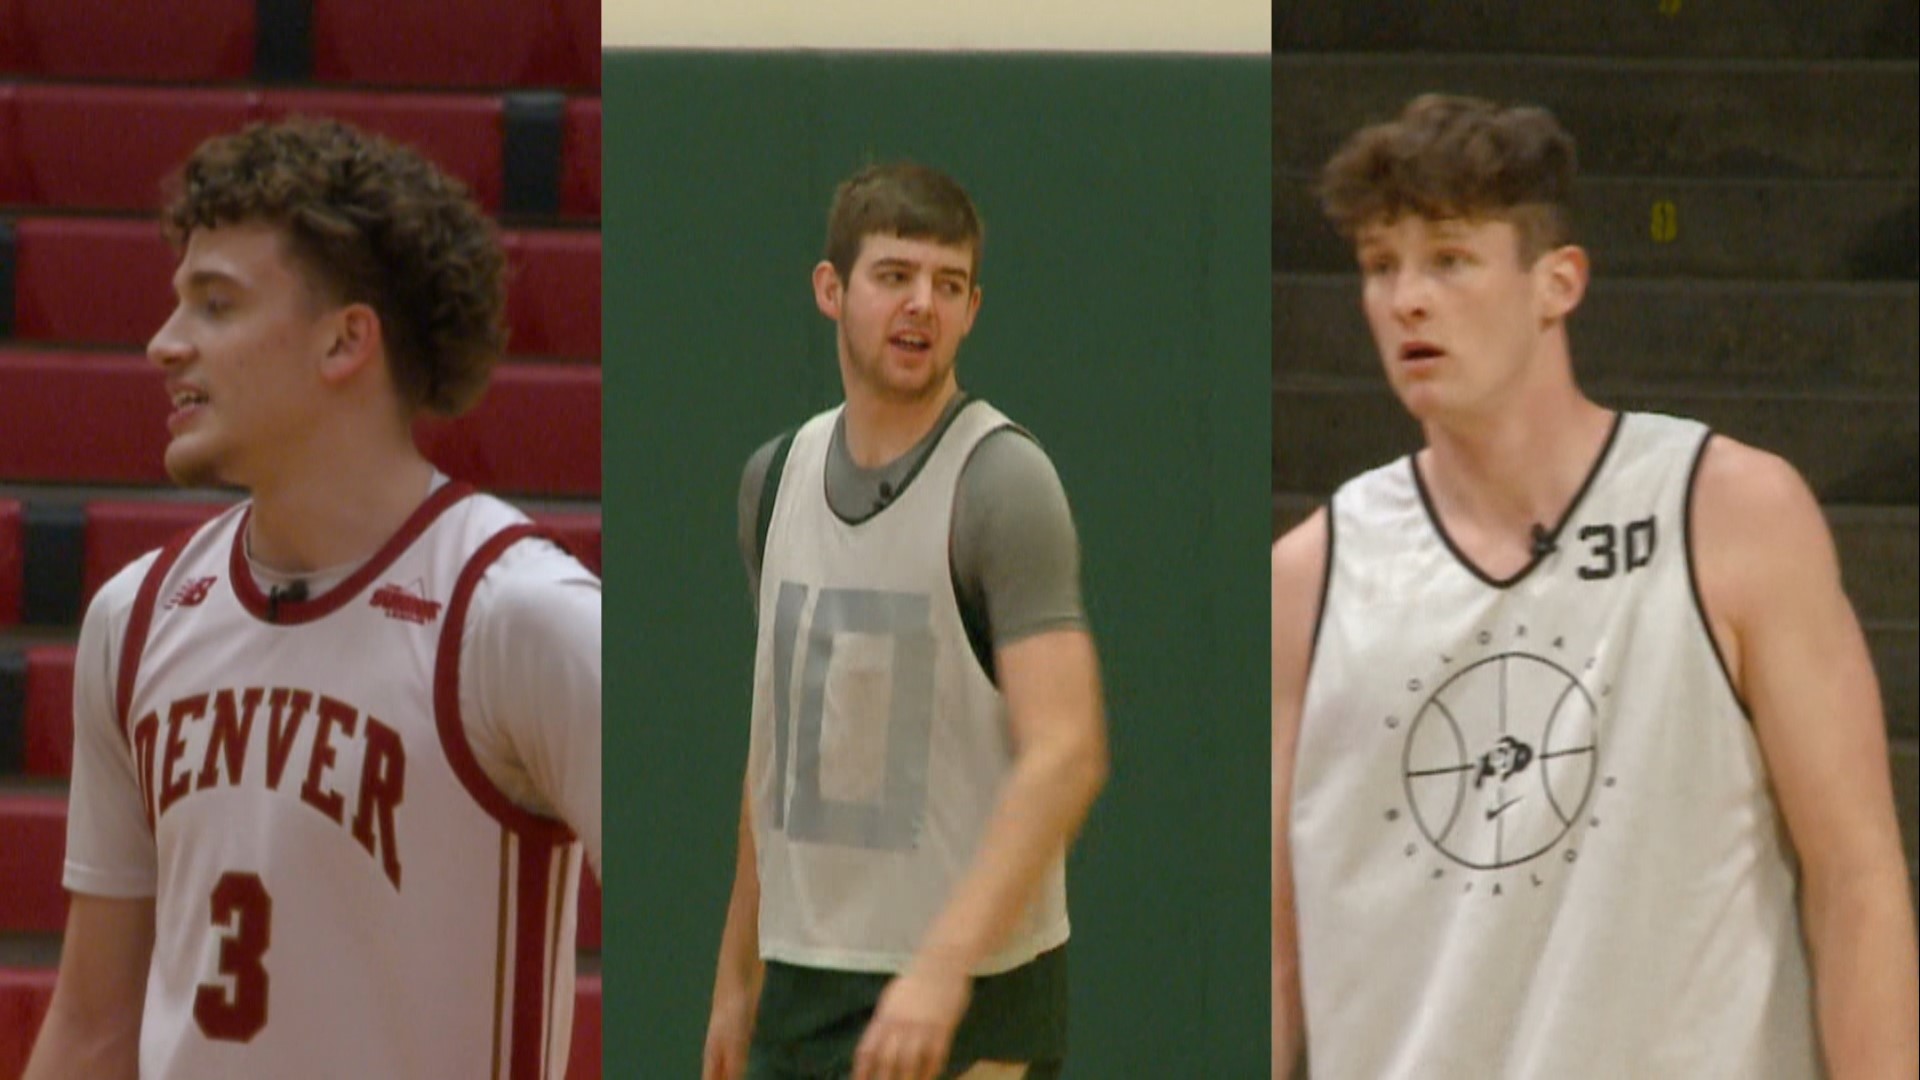 Walk-ons who make up the scout teams challenge the starters every day in practice, study film and mimic the opponents plays.